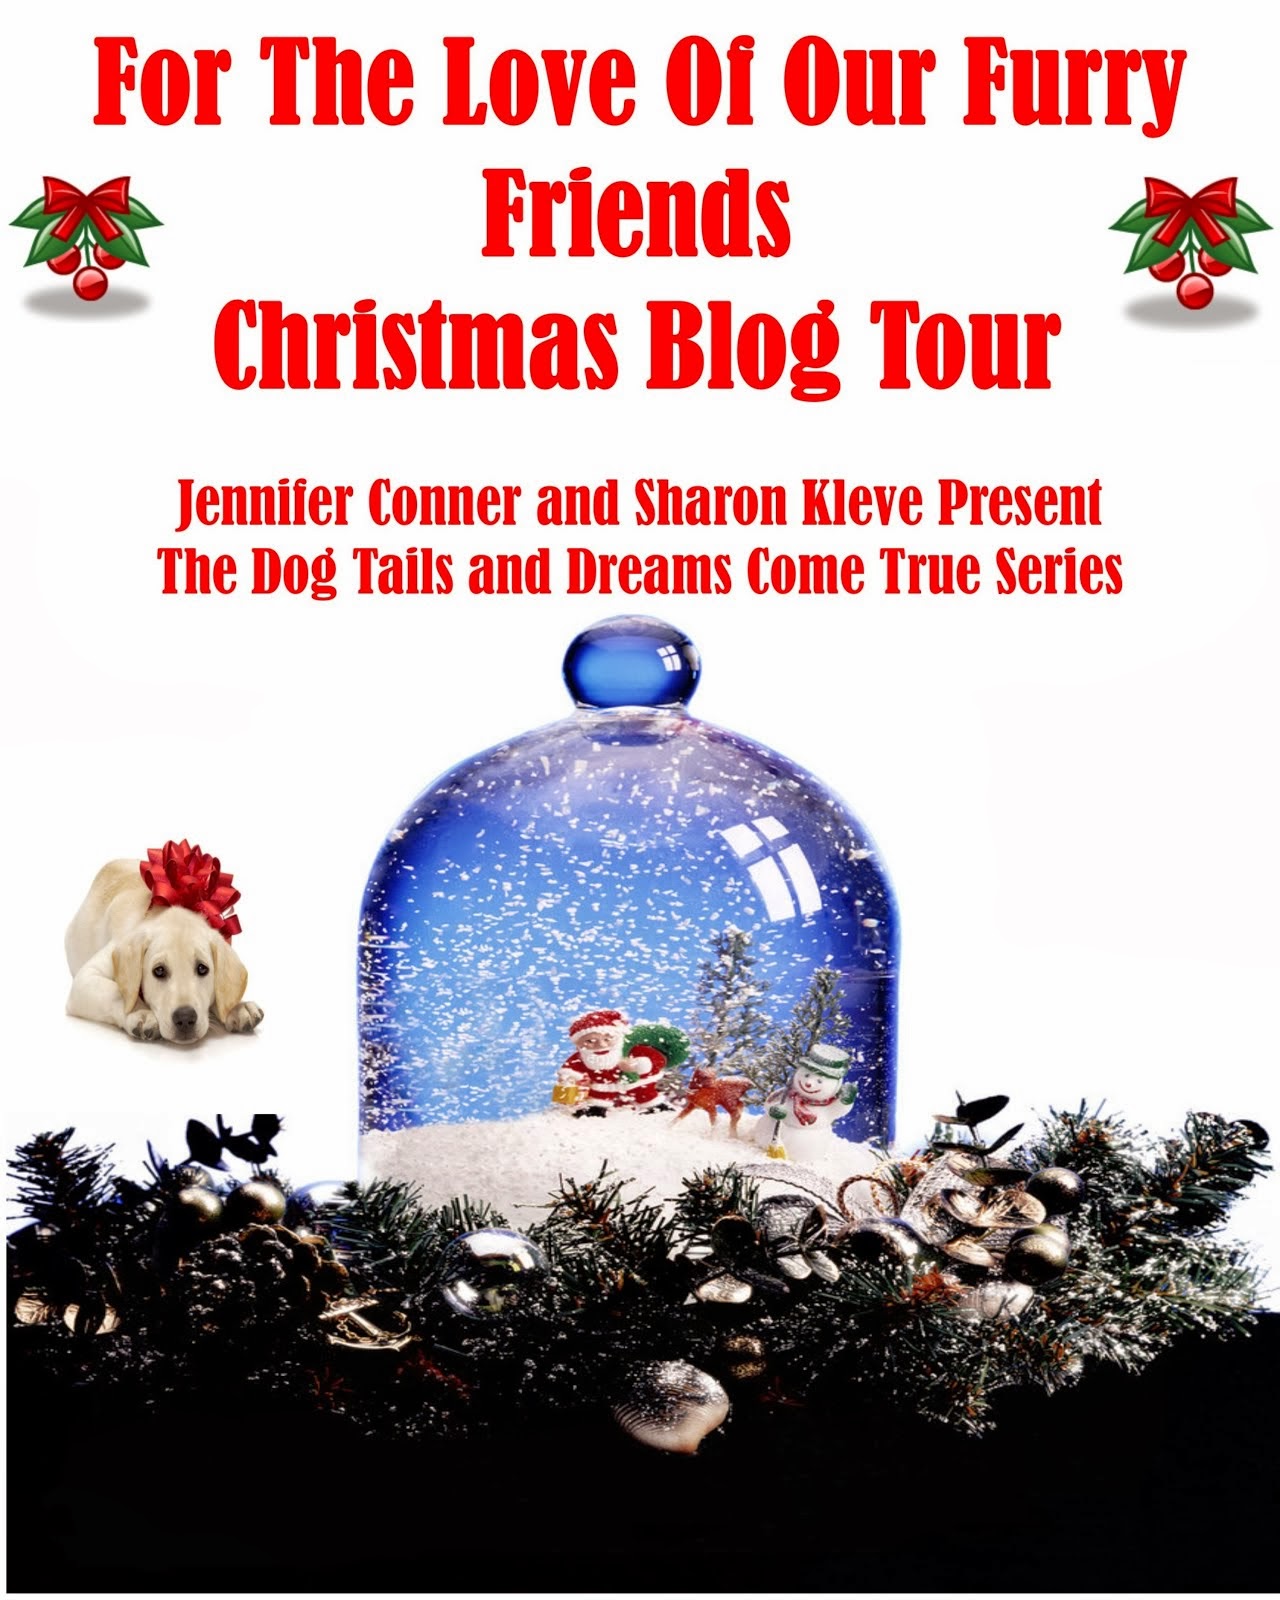 For The Love Of Our Furry Friends Christmas Blog Tour